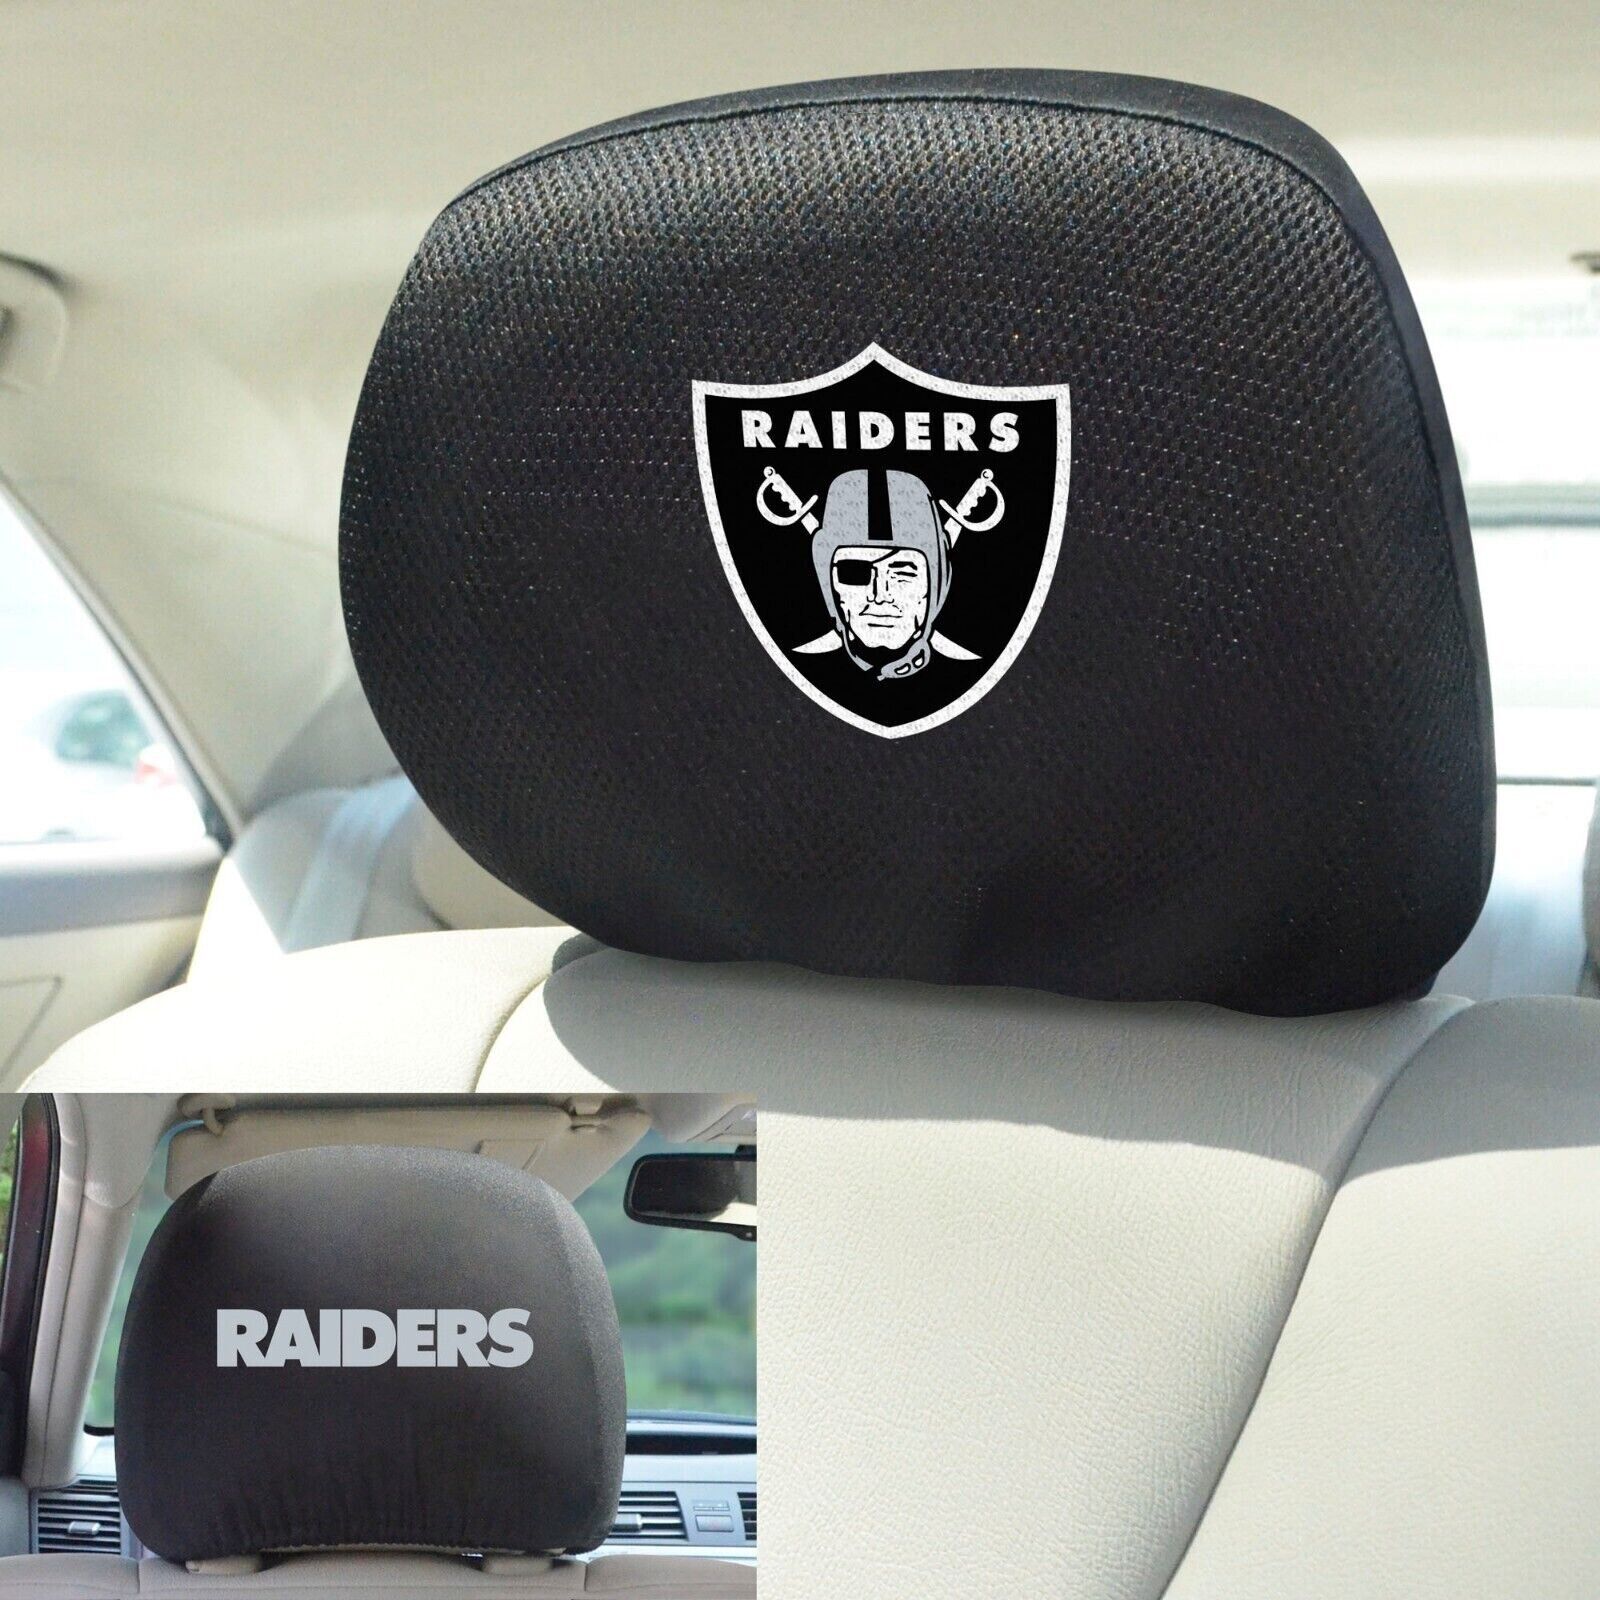 LAS VEGAS OAKLAND Raiders ✅Authentic 2 Piece Embroidered Headrest Covers 🚚💨🆓